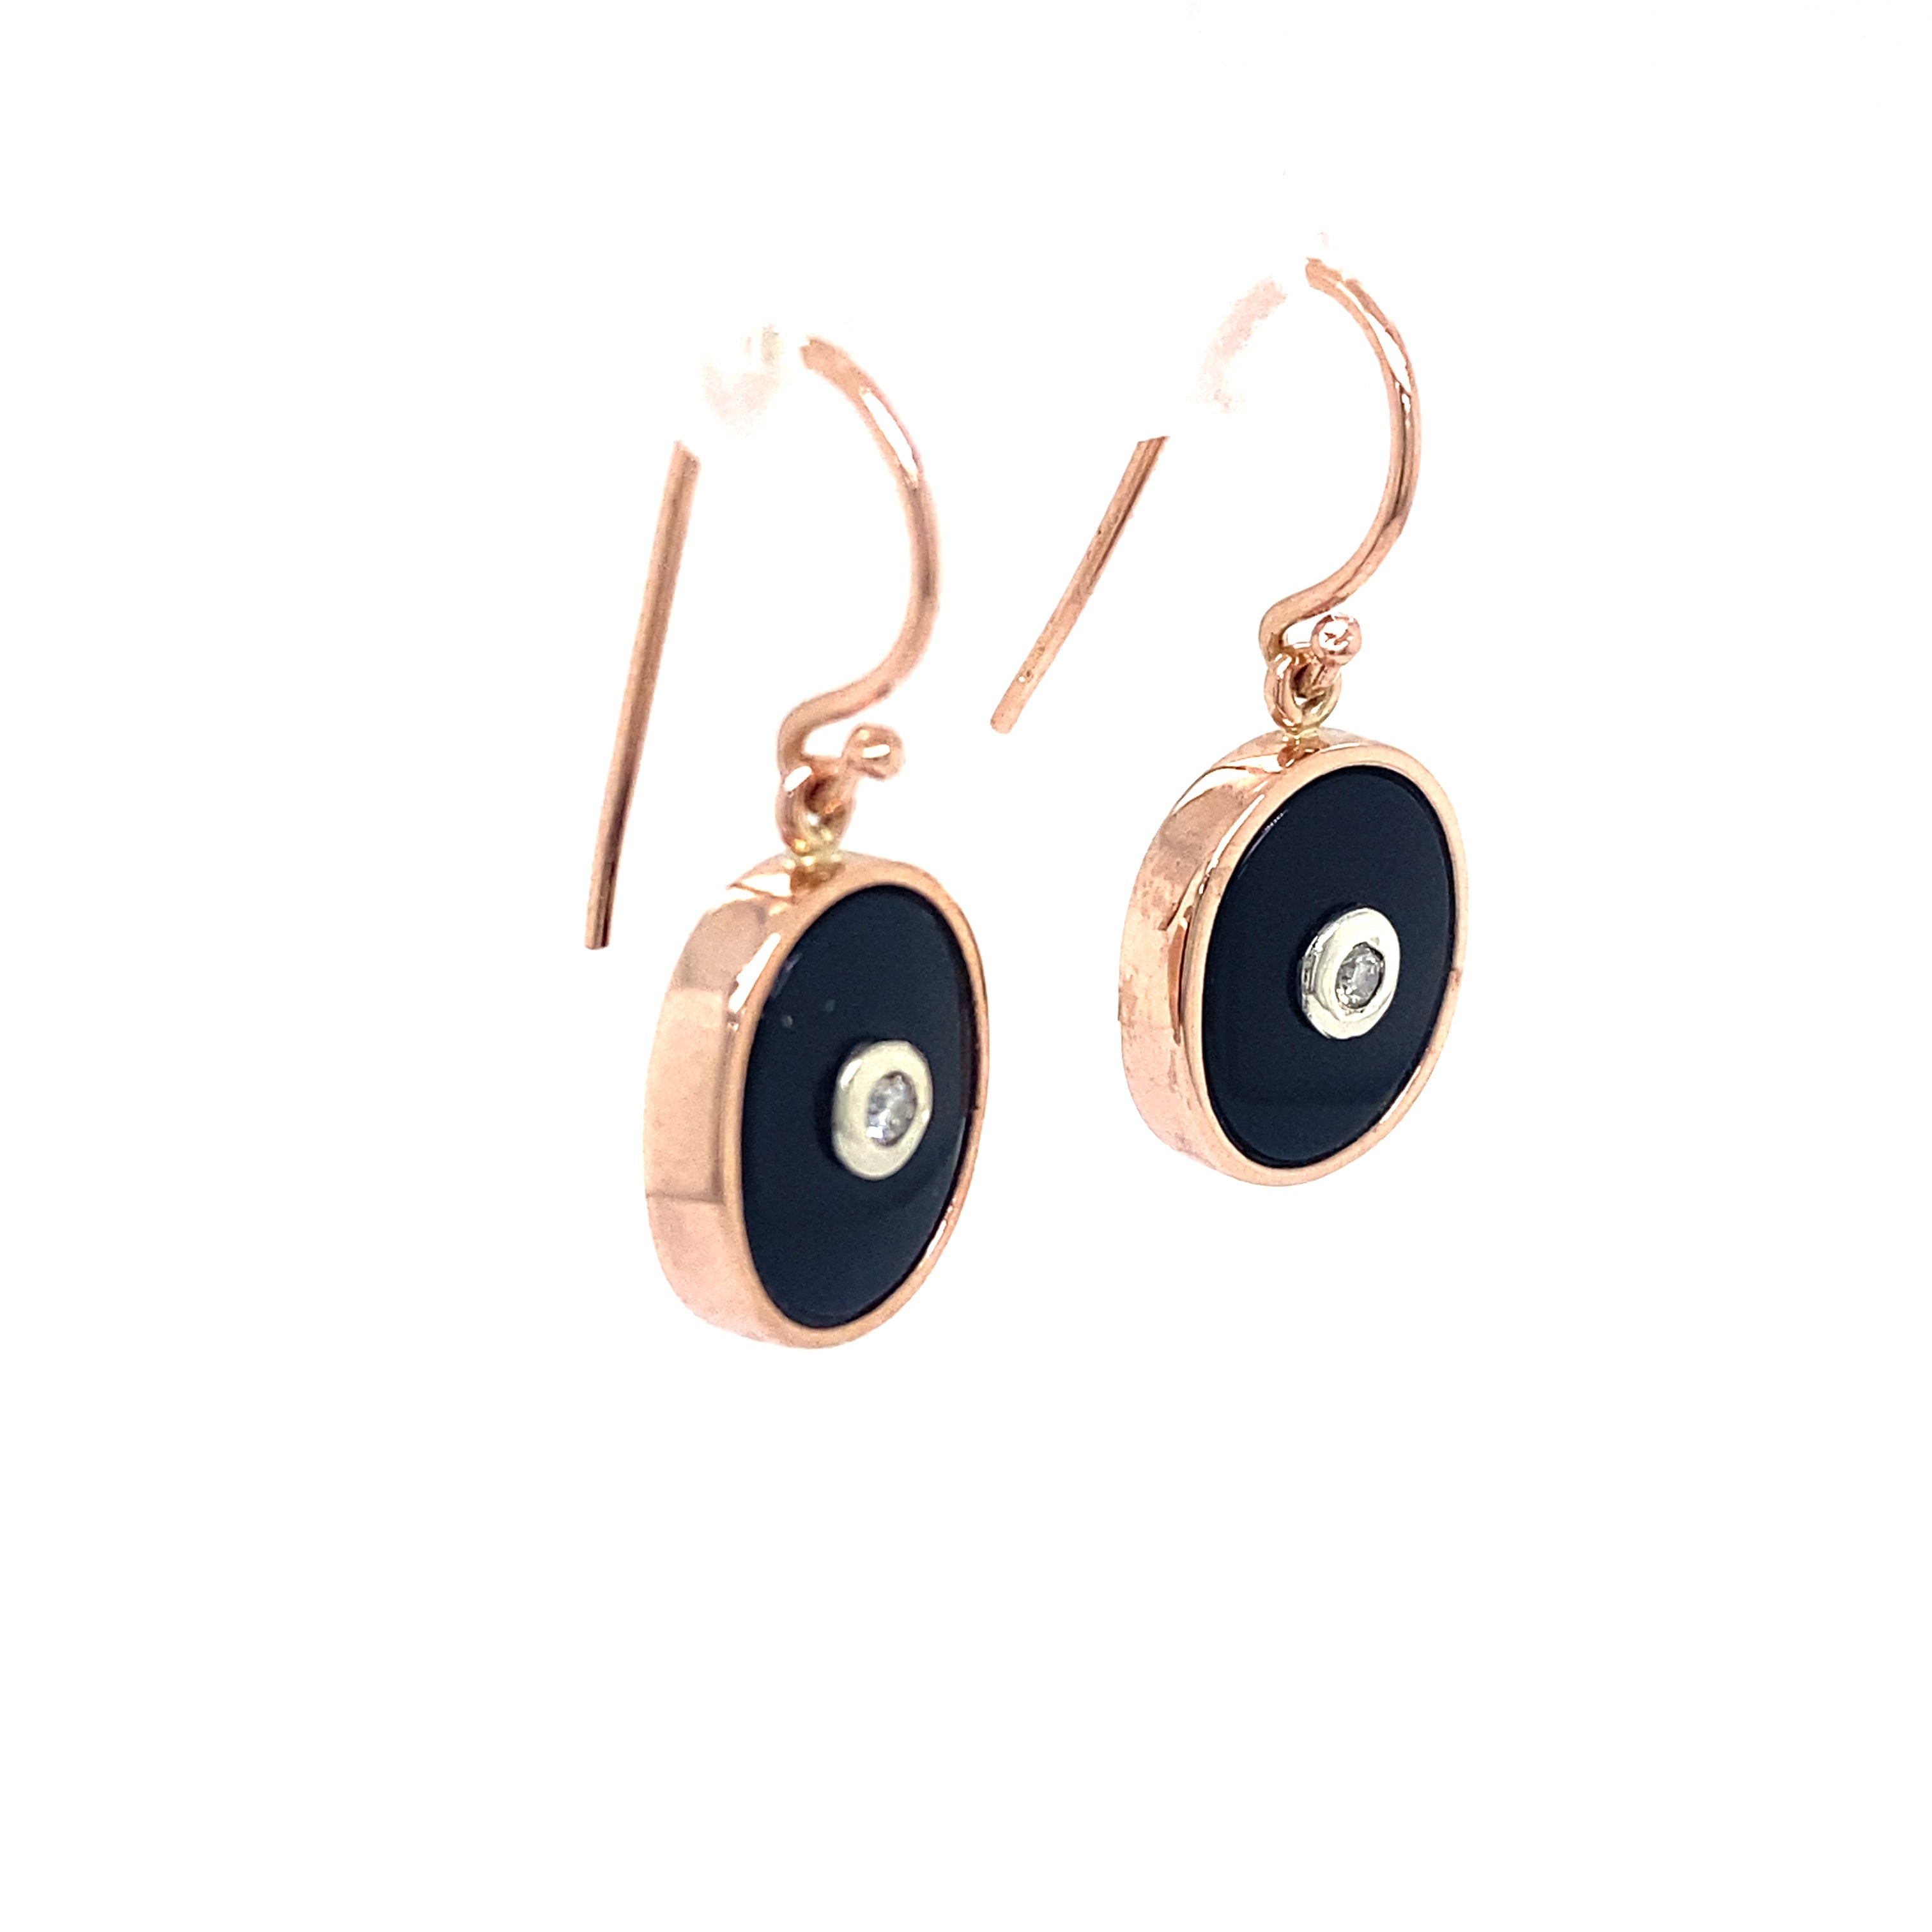 9ct rose gold onyx and diamond earrings.